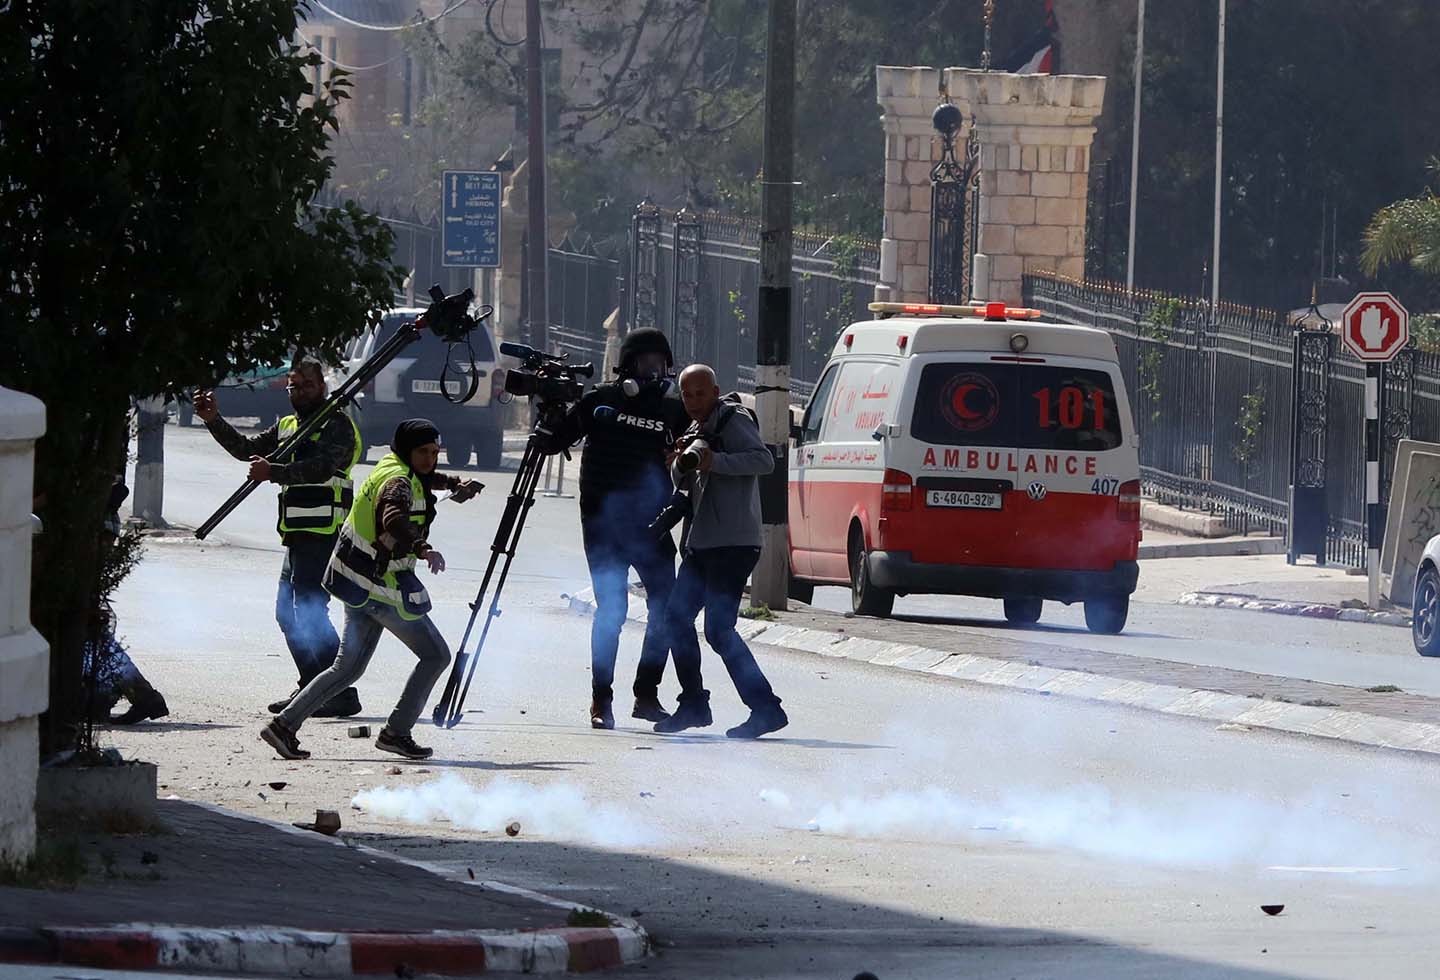 Press House publishes a factsheet on Violations against Media Freedoms in Palestine, April 2022.